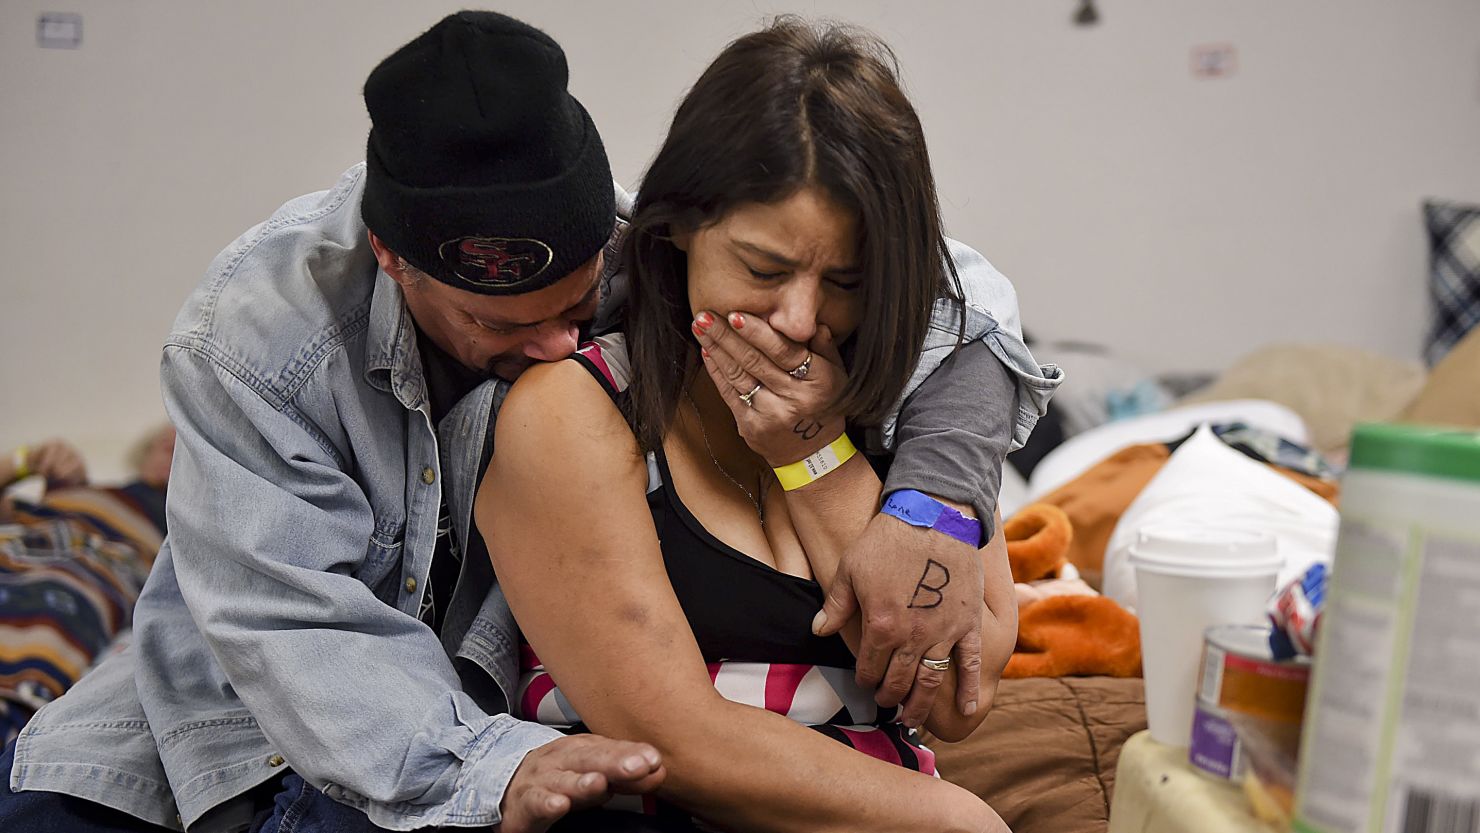 Joseph Grado and his wife, Susan Grado, embrace while staying at a shelter for fire evacuees in Chico, California. They lost their Paradise home in the Camp Fire.